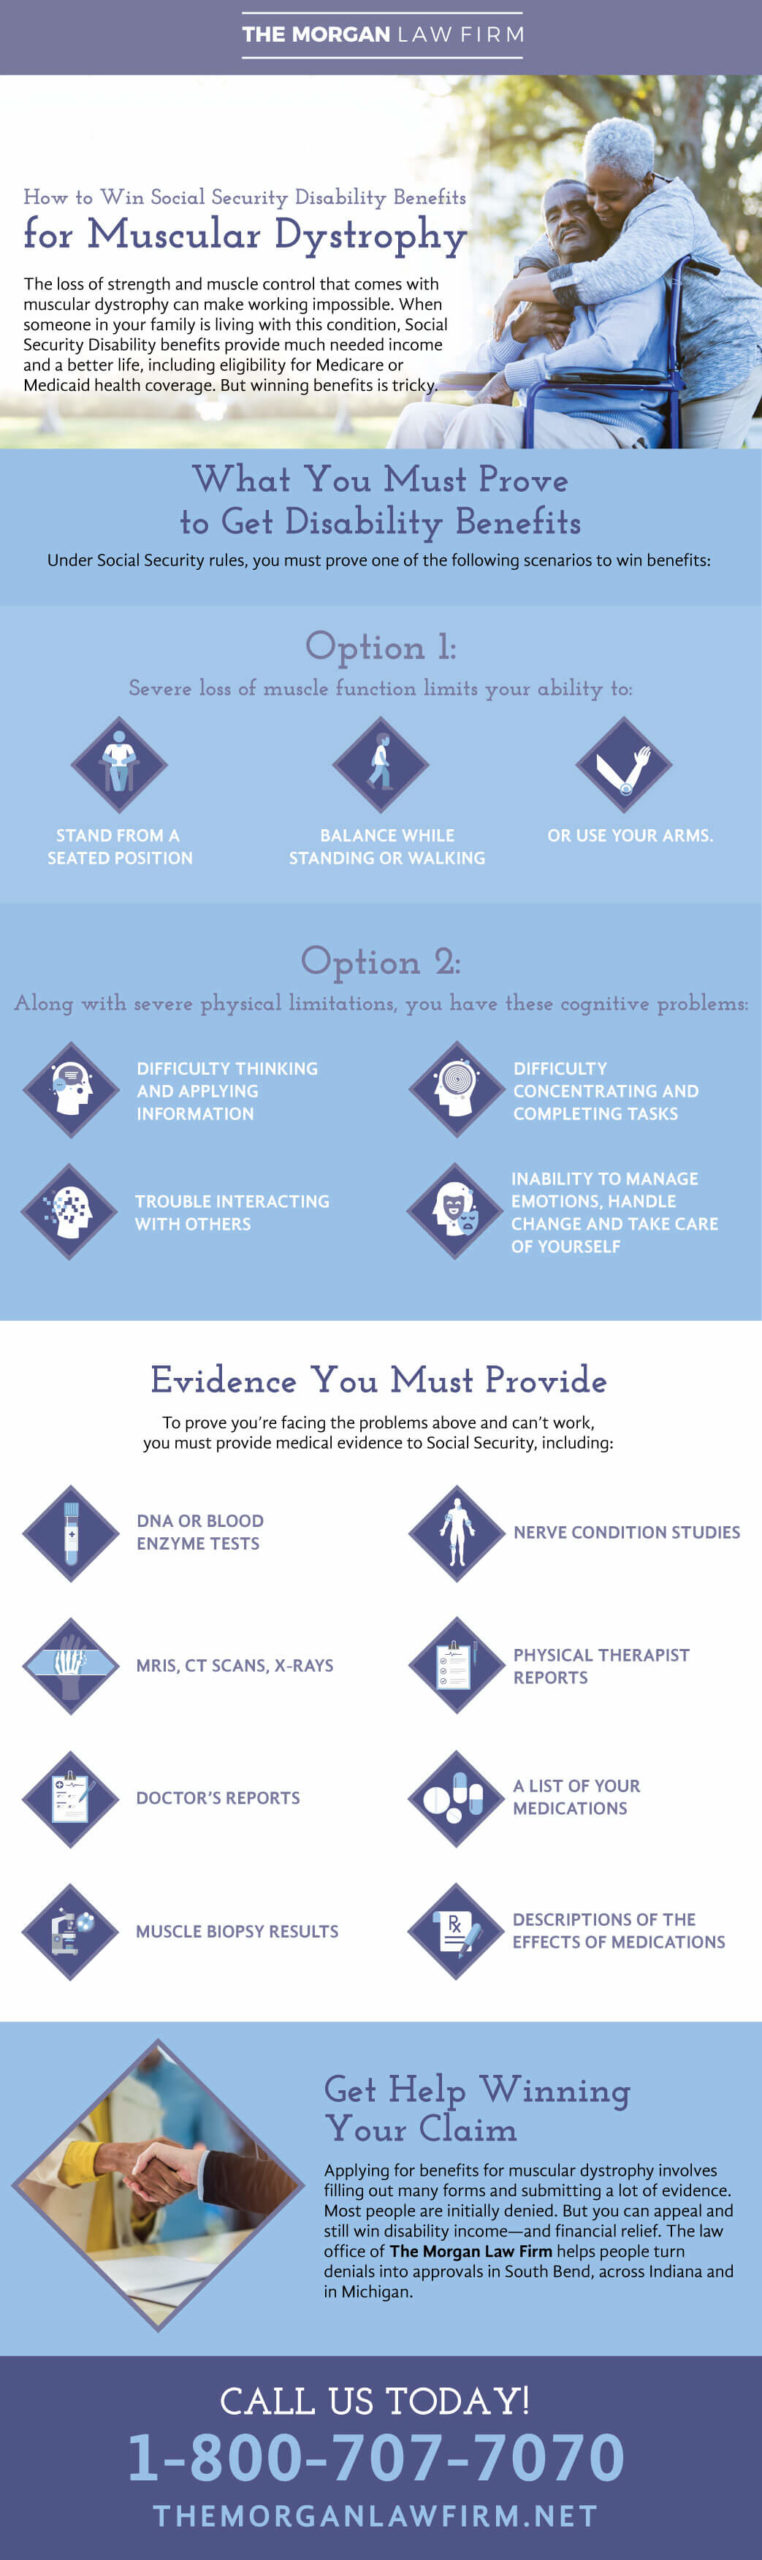 An infographic for social security benefits for people with muscular dystrophy. 